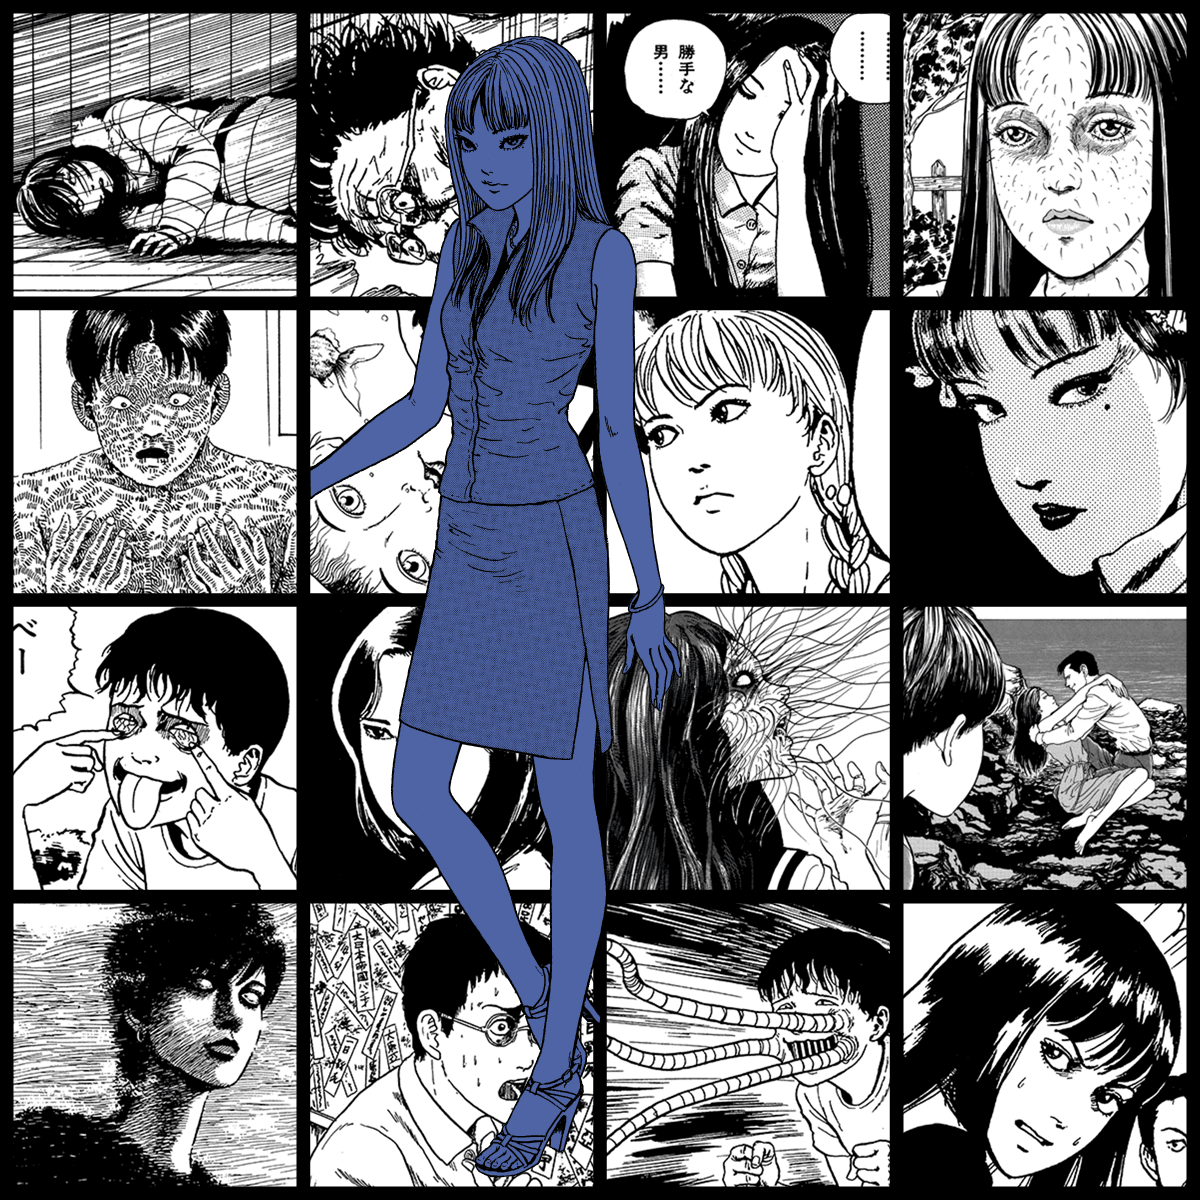 TOMIE by Junji Ito #1804